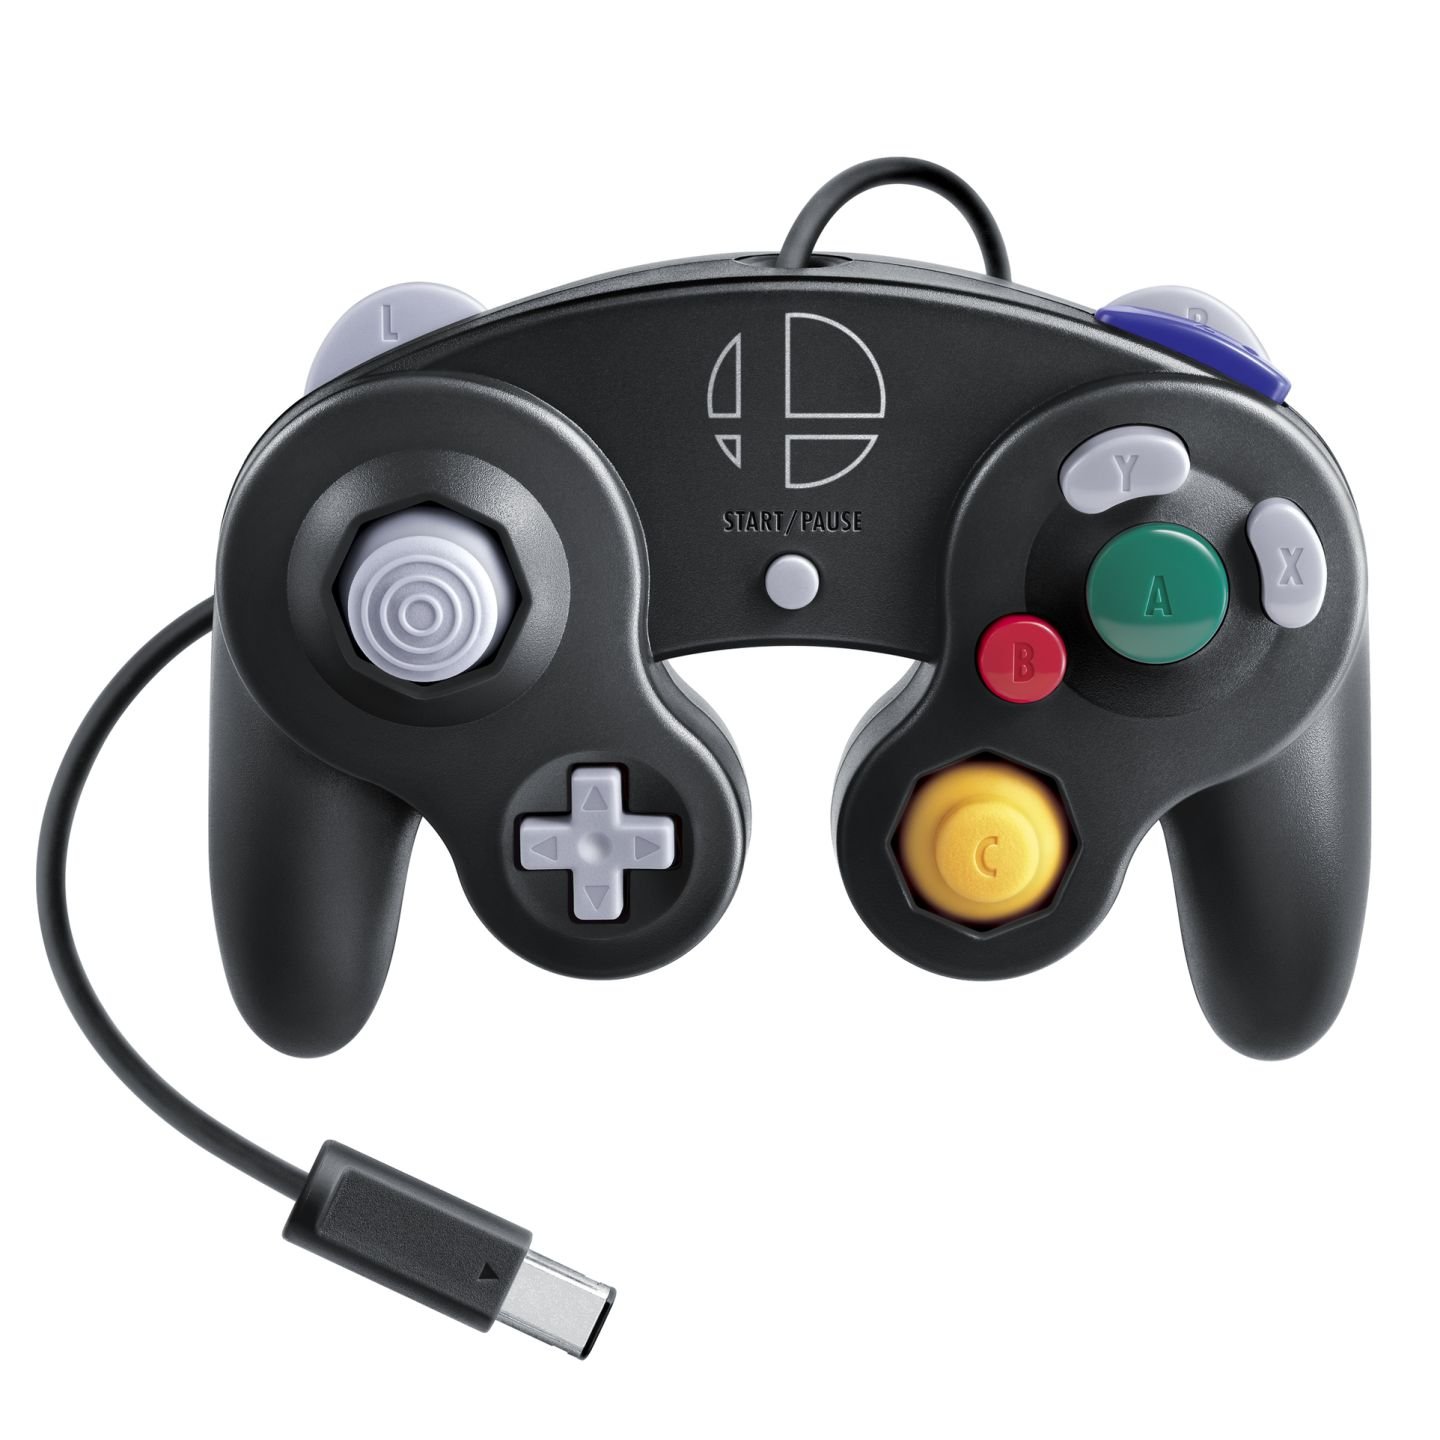 can you use gamecube controllers on the switch